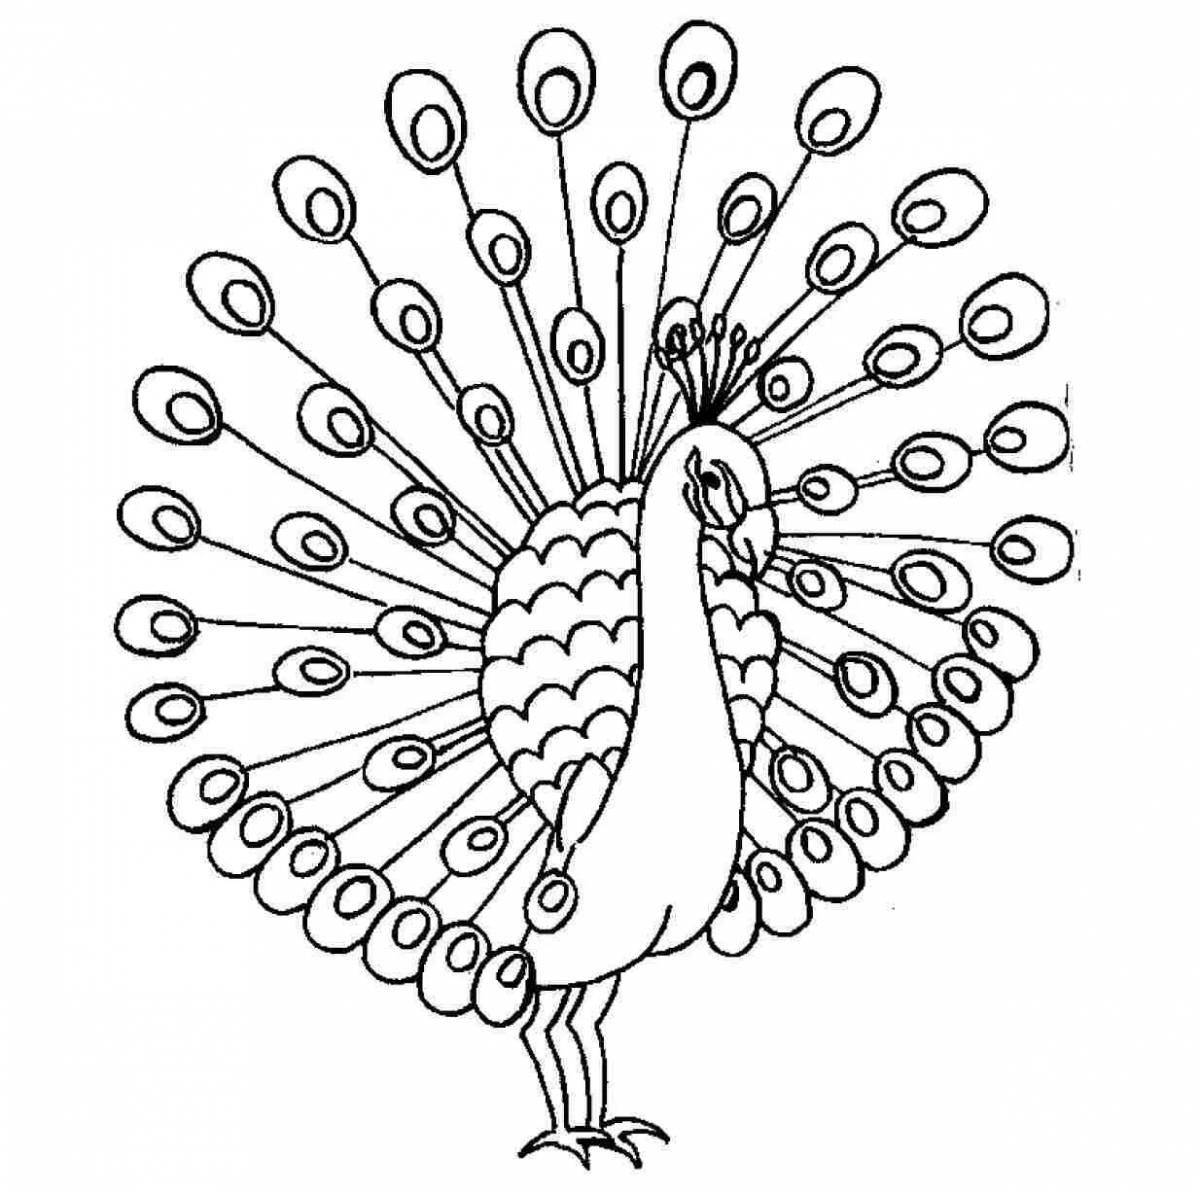 Amazing coloring pages of firebirds for kids